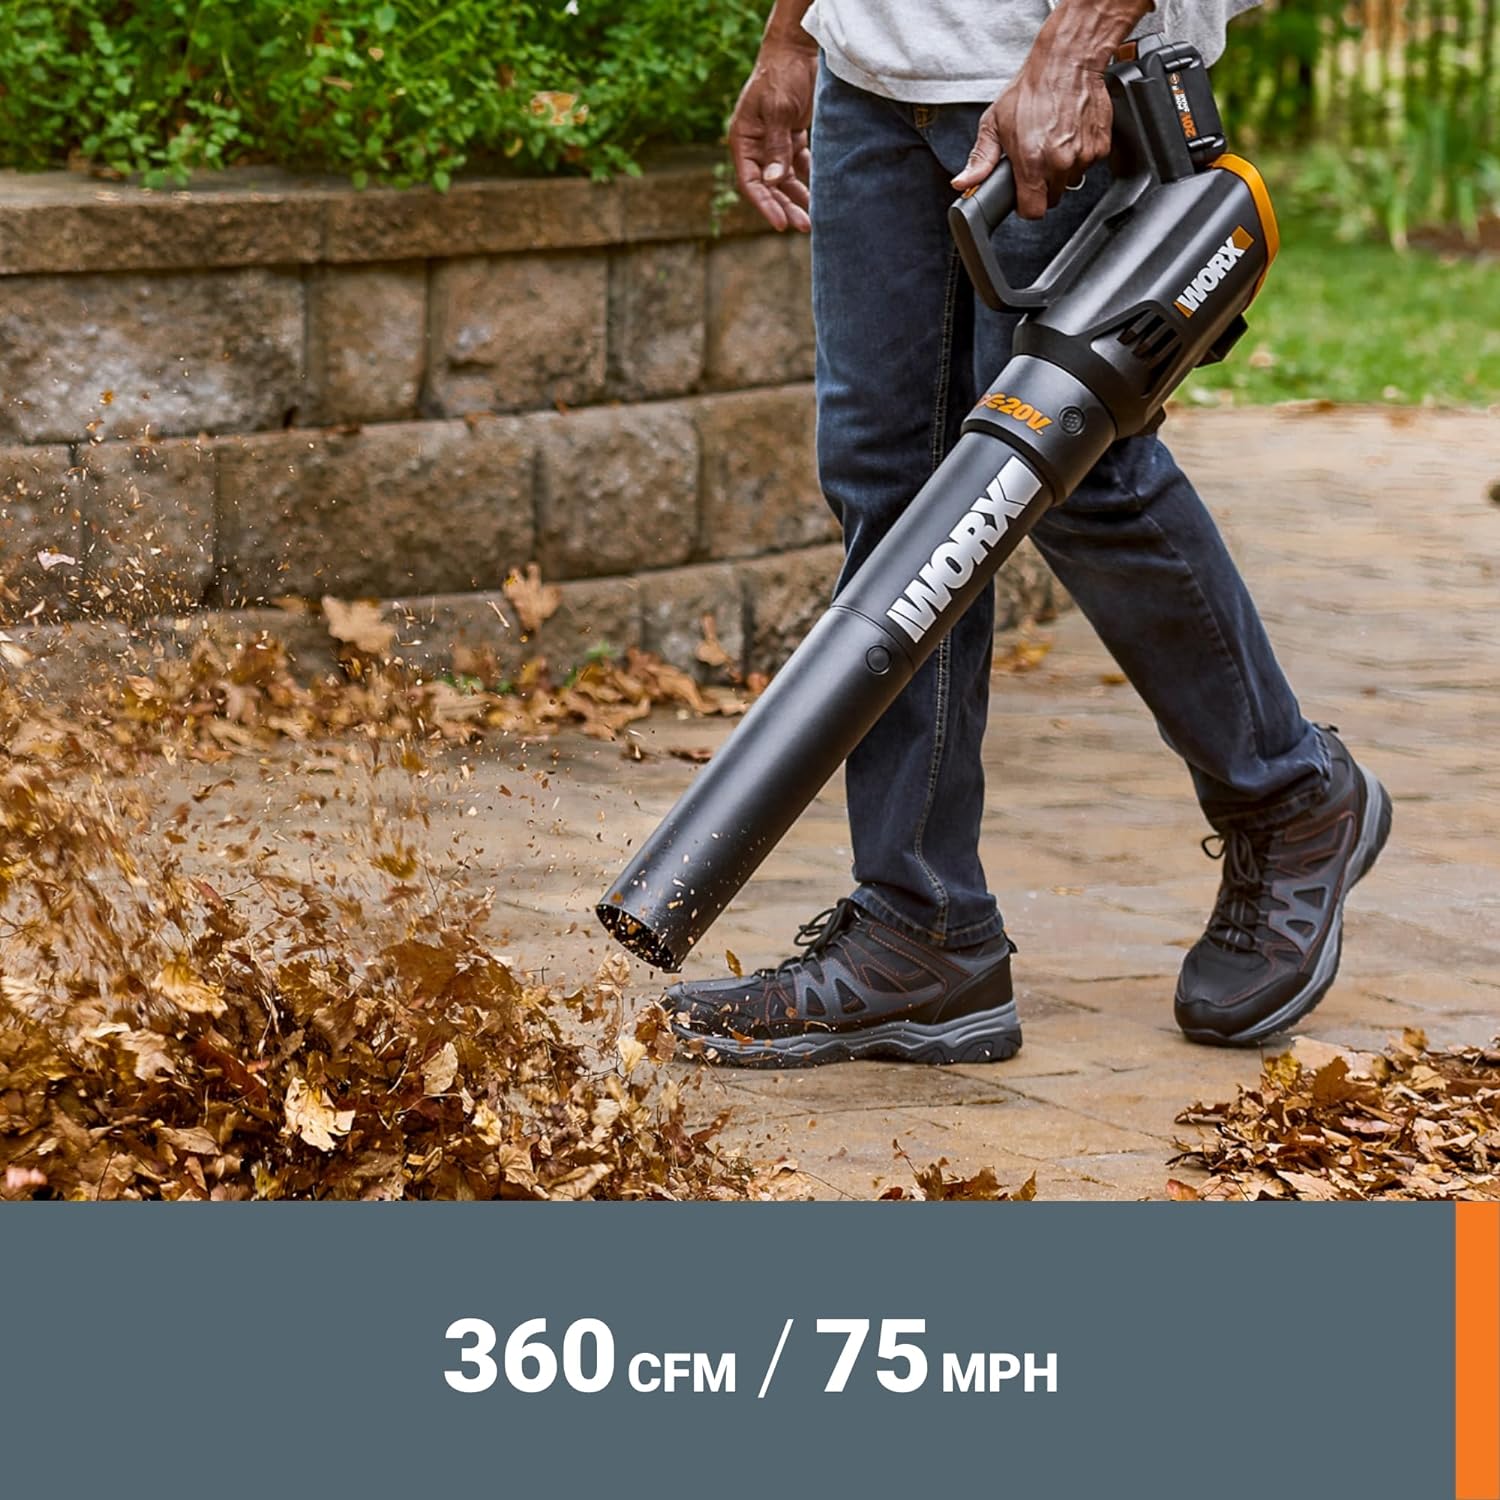 Worx 20V 2-Speed Leaf Blower Cordless with Battery and Charger